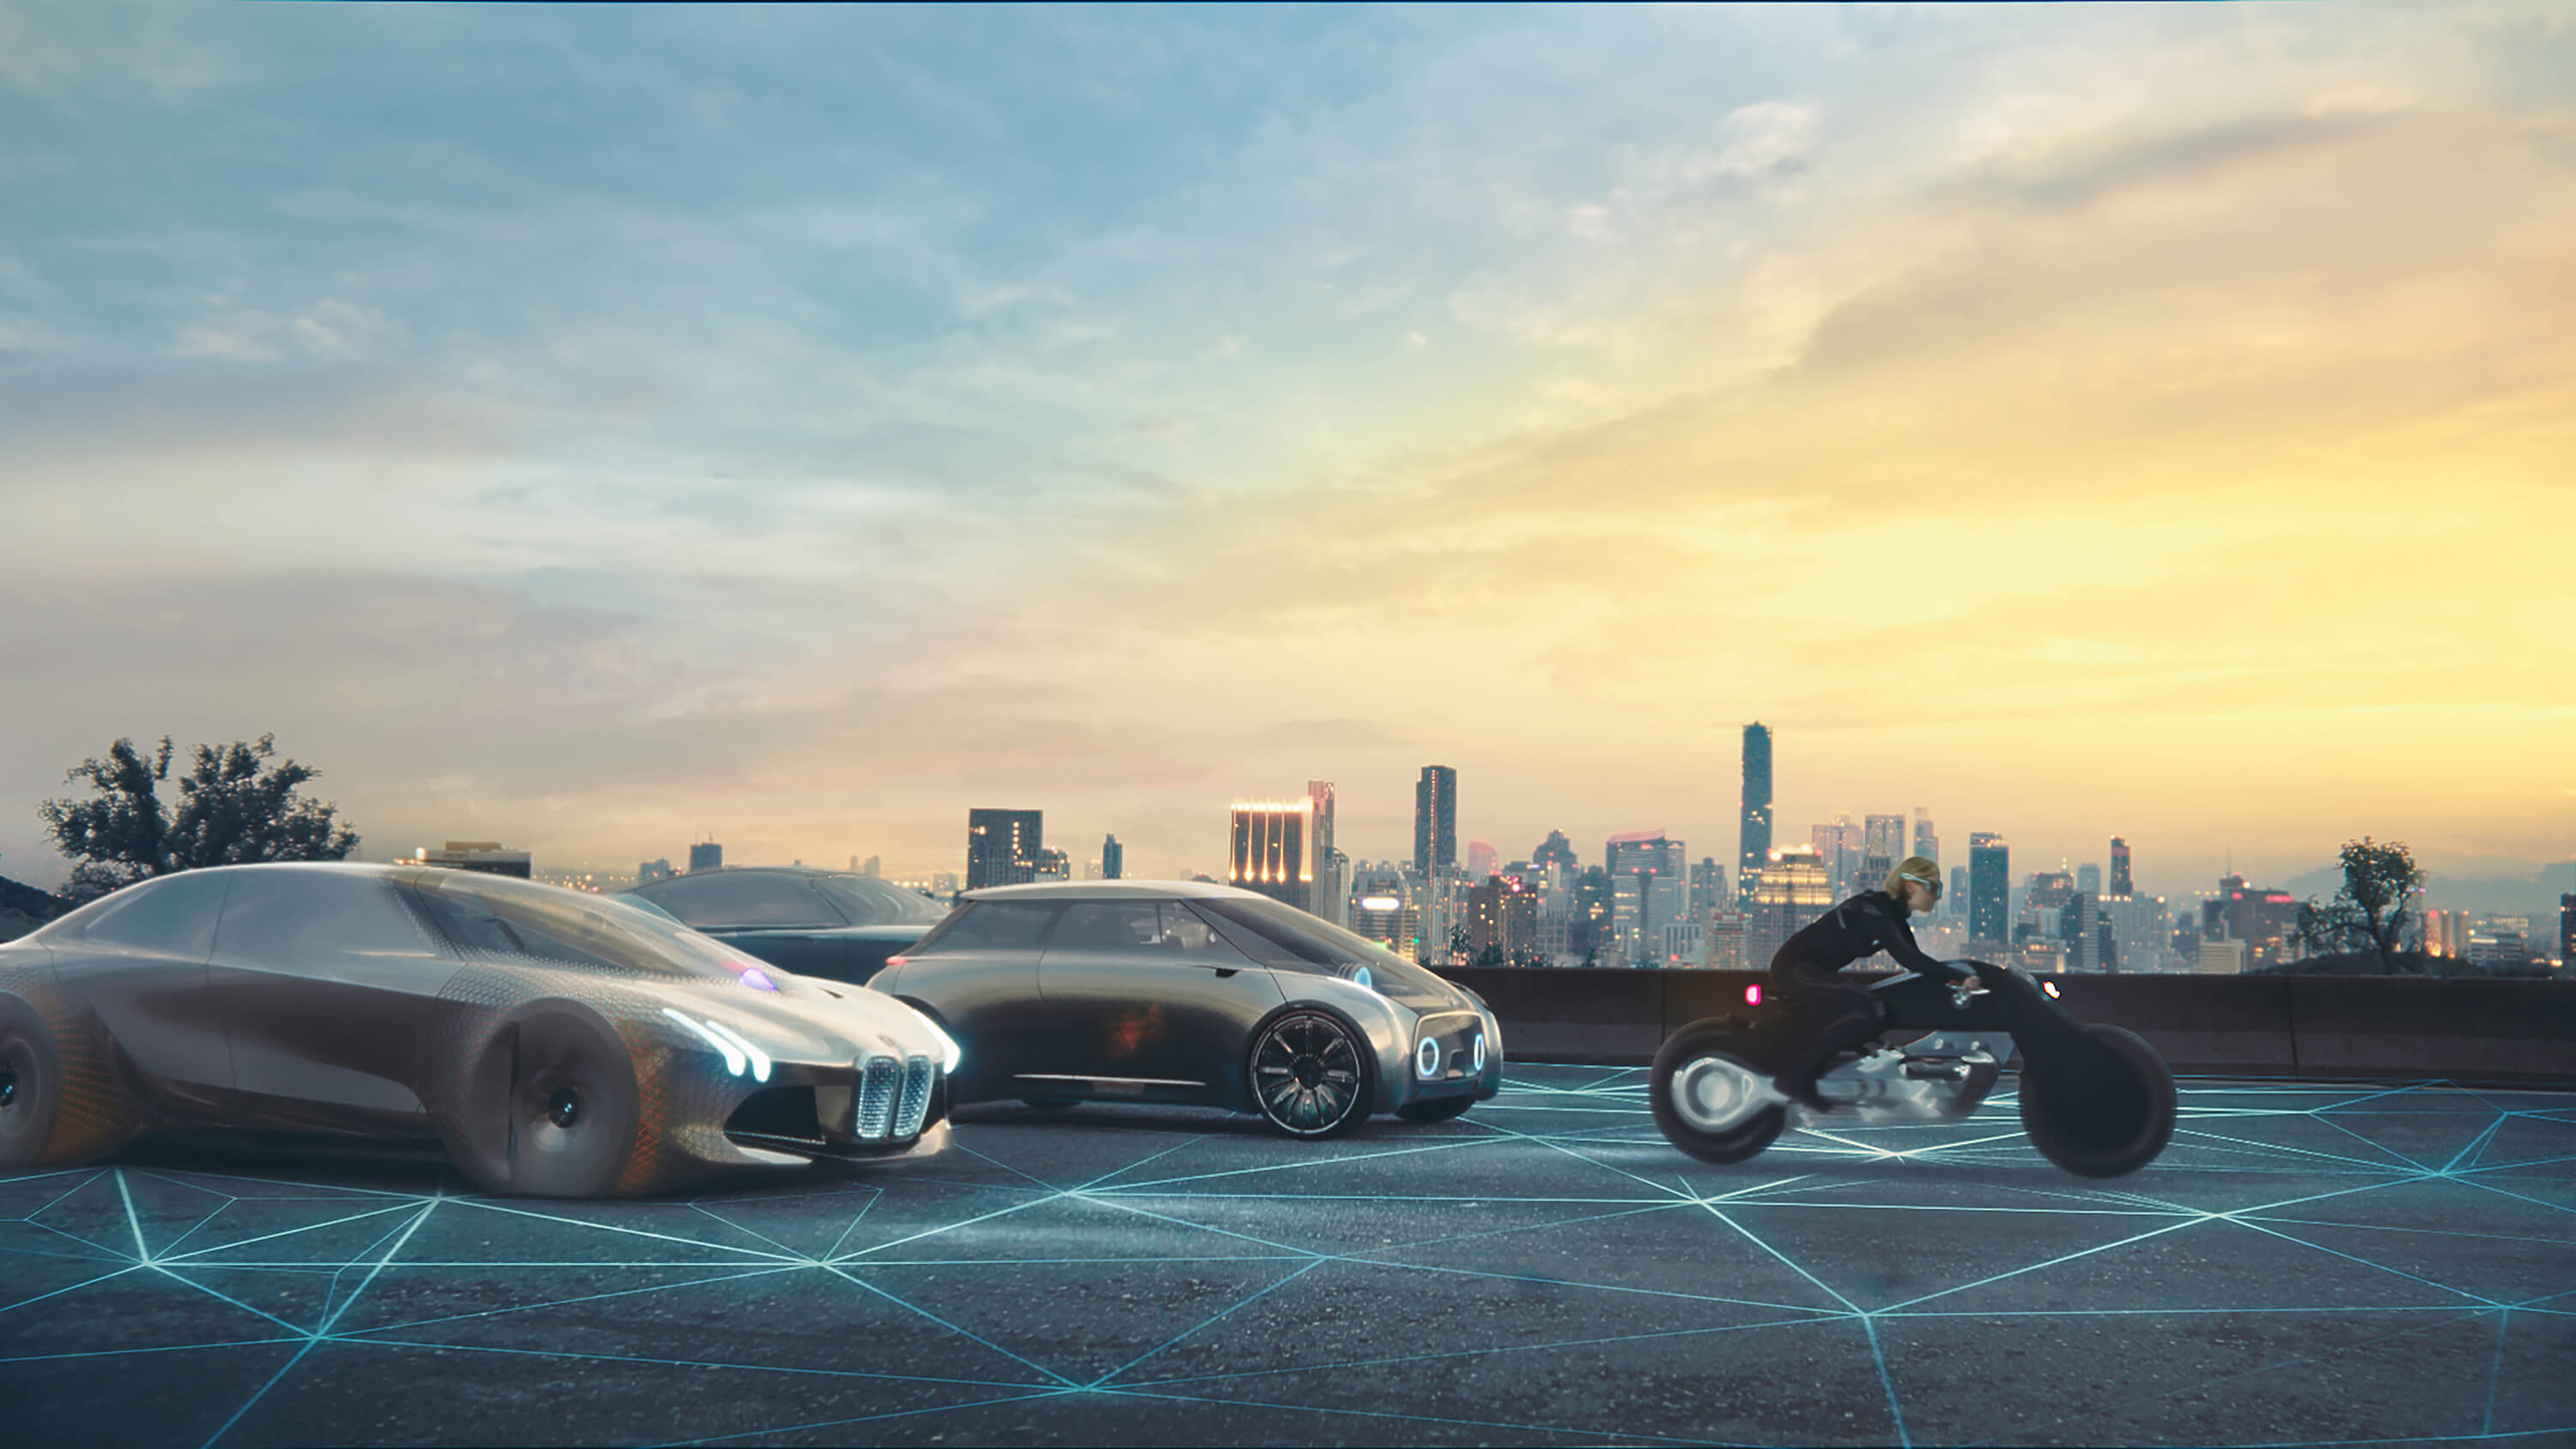 “A NEW ERA”: New BMW Group film launches online. The story of the BMW Group’s 100th-anniversary corporate campaign continues.